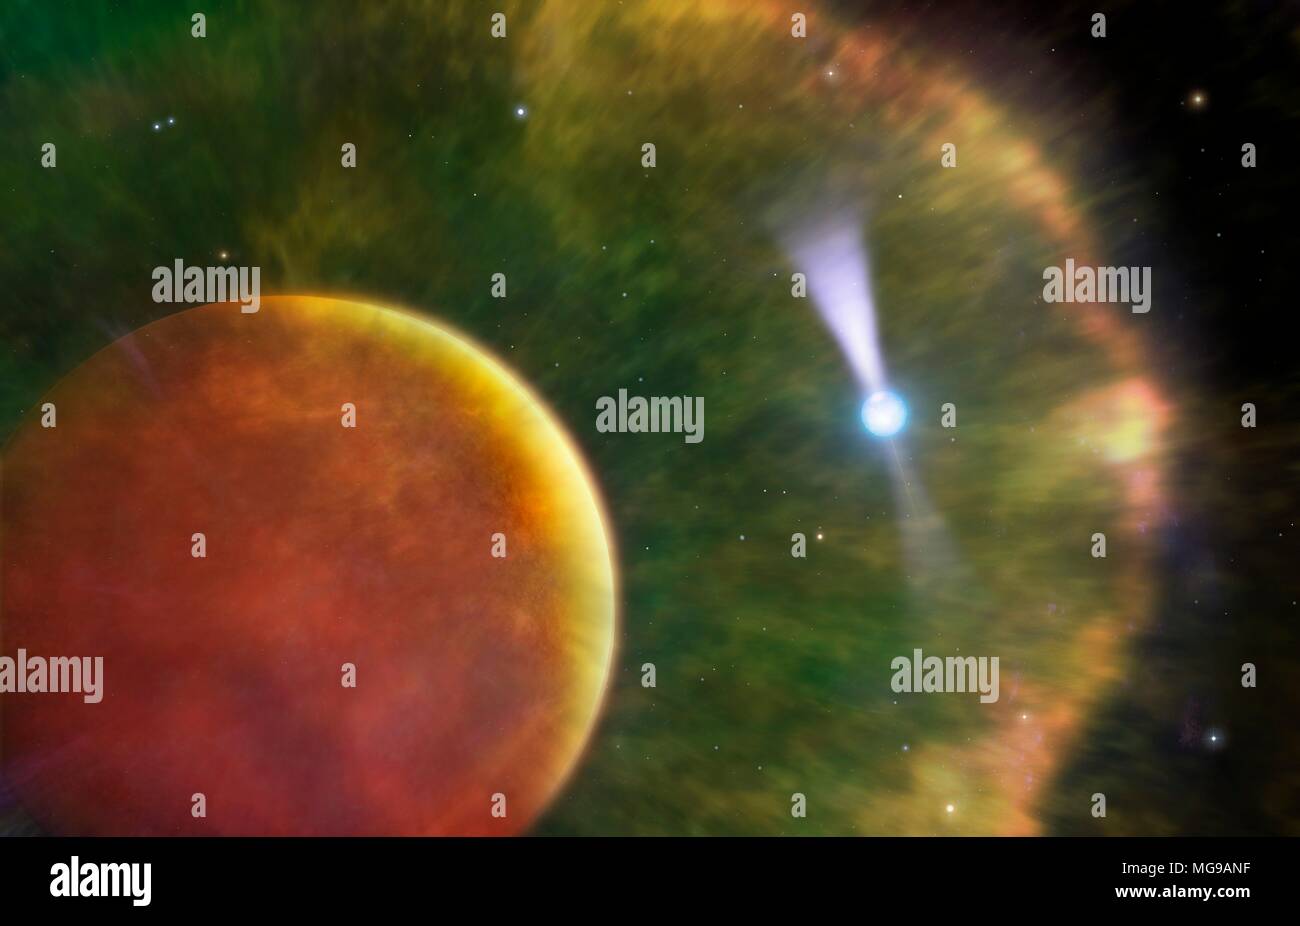 Illustration of the so-called Black Widow Pulsar. This is a pulsar (right), a rapidly rotating neutron star, discovered in 1988, which is in orbit around a brown dwarf (left). The name black widow is applied because the companion to the pulsar is being destroyed by it. Brown dwarves are objects which form as stars do, but which do not attain the core temperatures necessary to fuse hydrogen into helium, as in true stars. Astronomers have detected a bow-shock around the brown dwarf, created as radiation from the pulsar wraps itself around the brown dwarf. Stock Photo